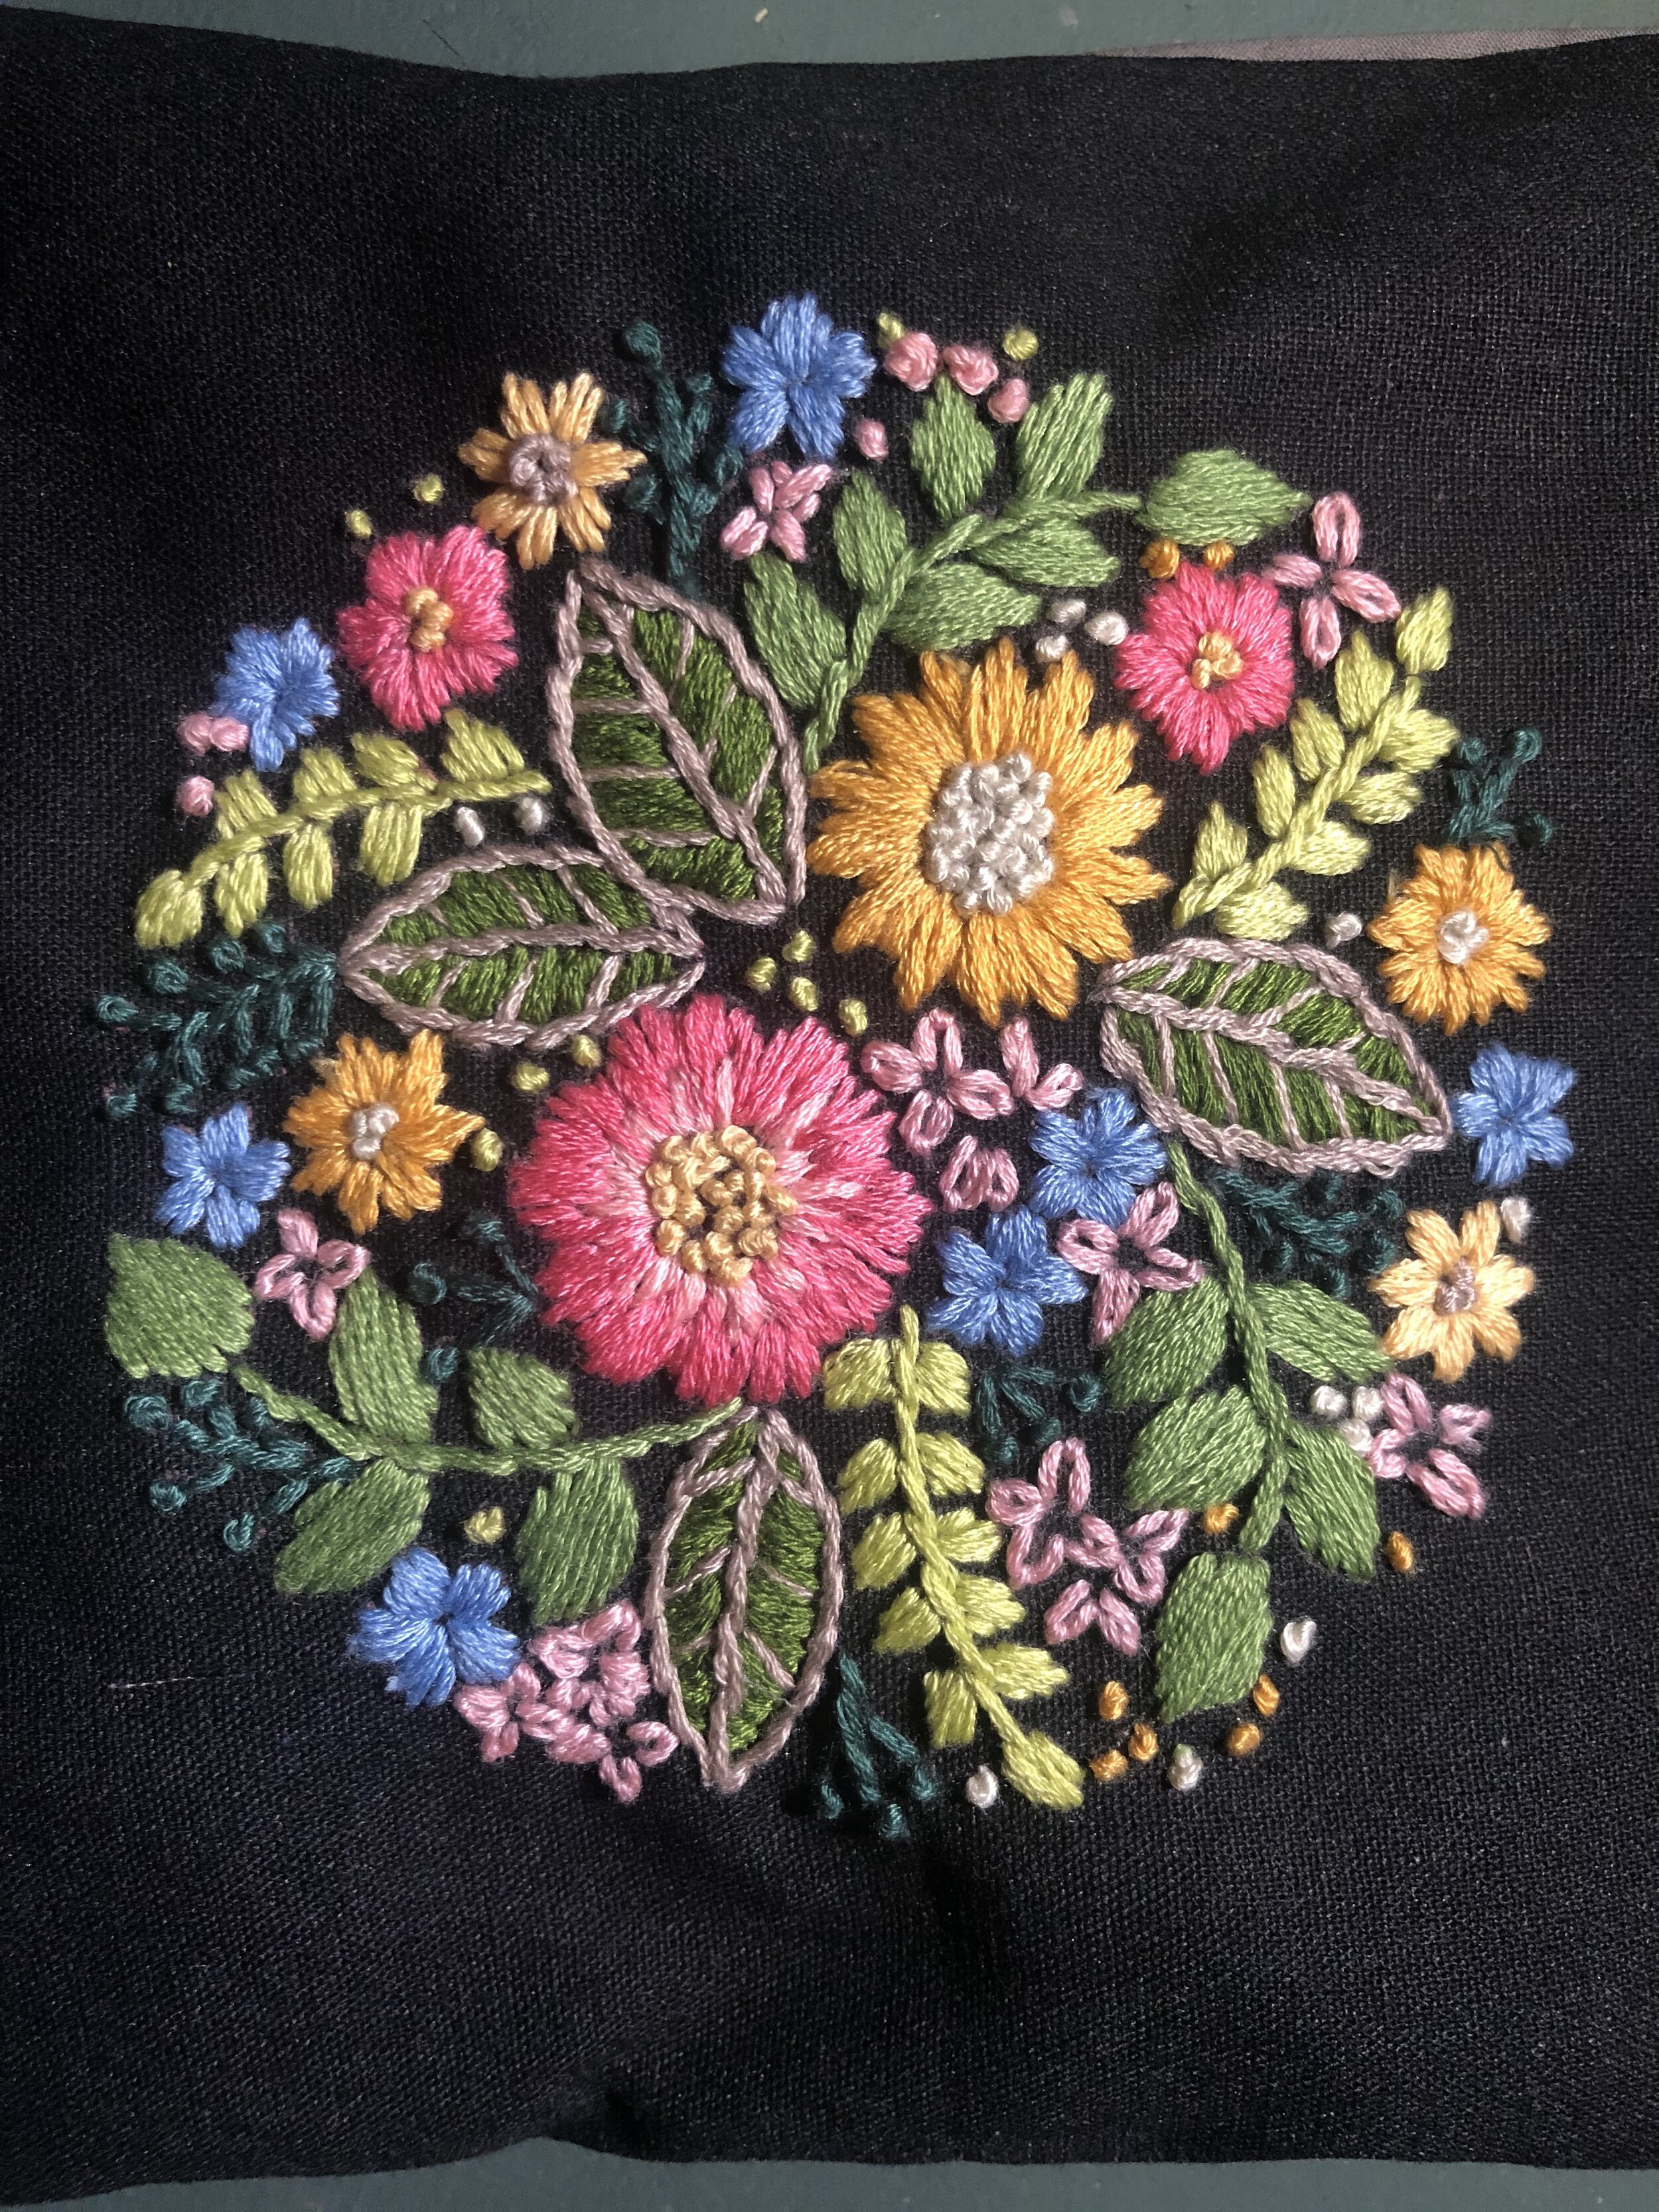 Embroidery Thread and Fabric, 2020